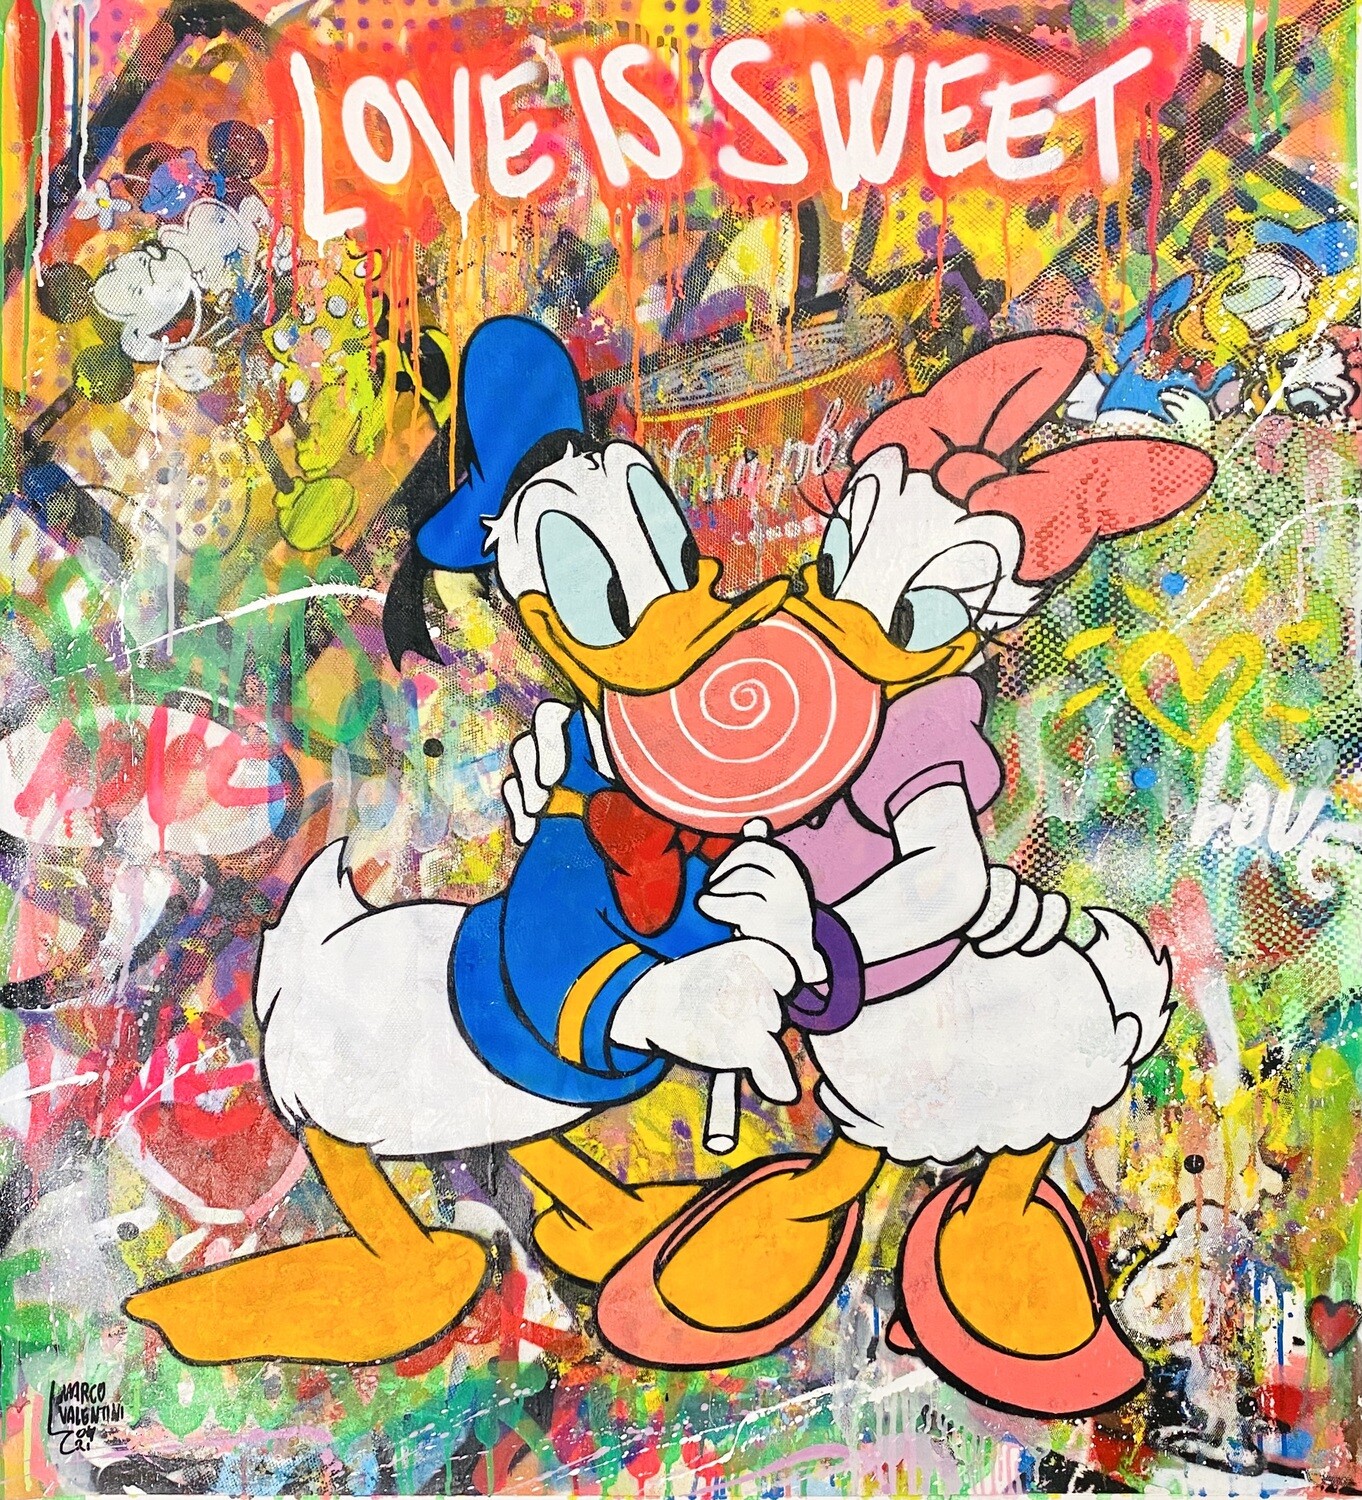 Marco Valentini “Donald and Daisy Love is sweet“